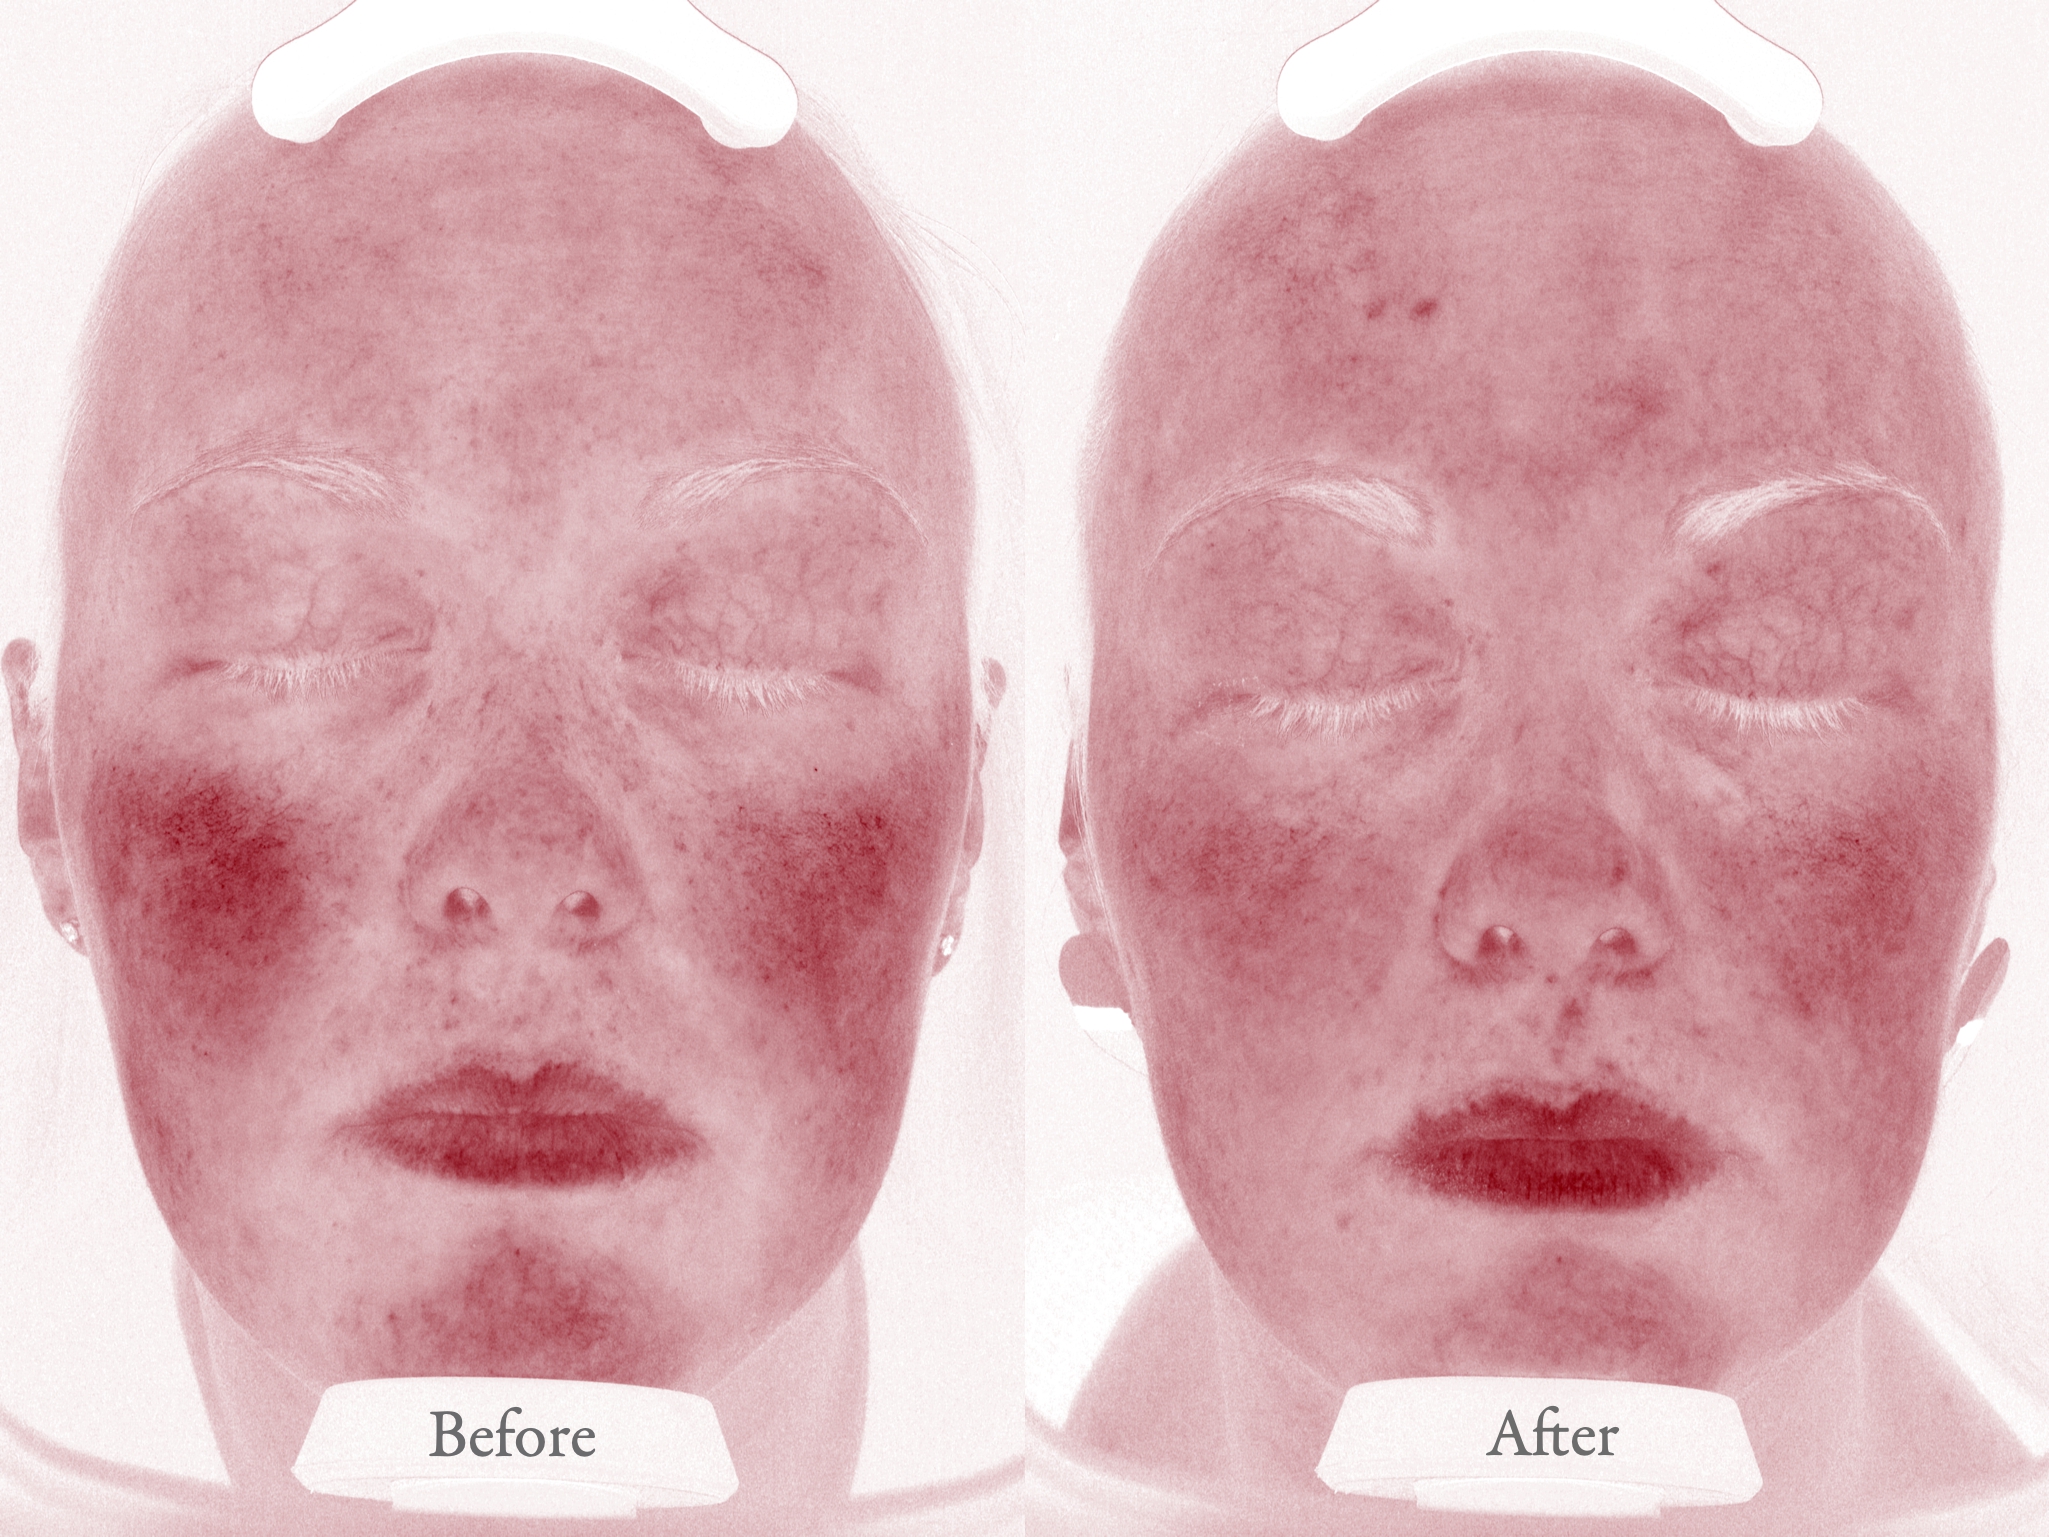 Results of BBL Treatment from Your Wellness Center in Cincinnati, Before and After